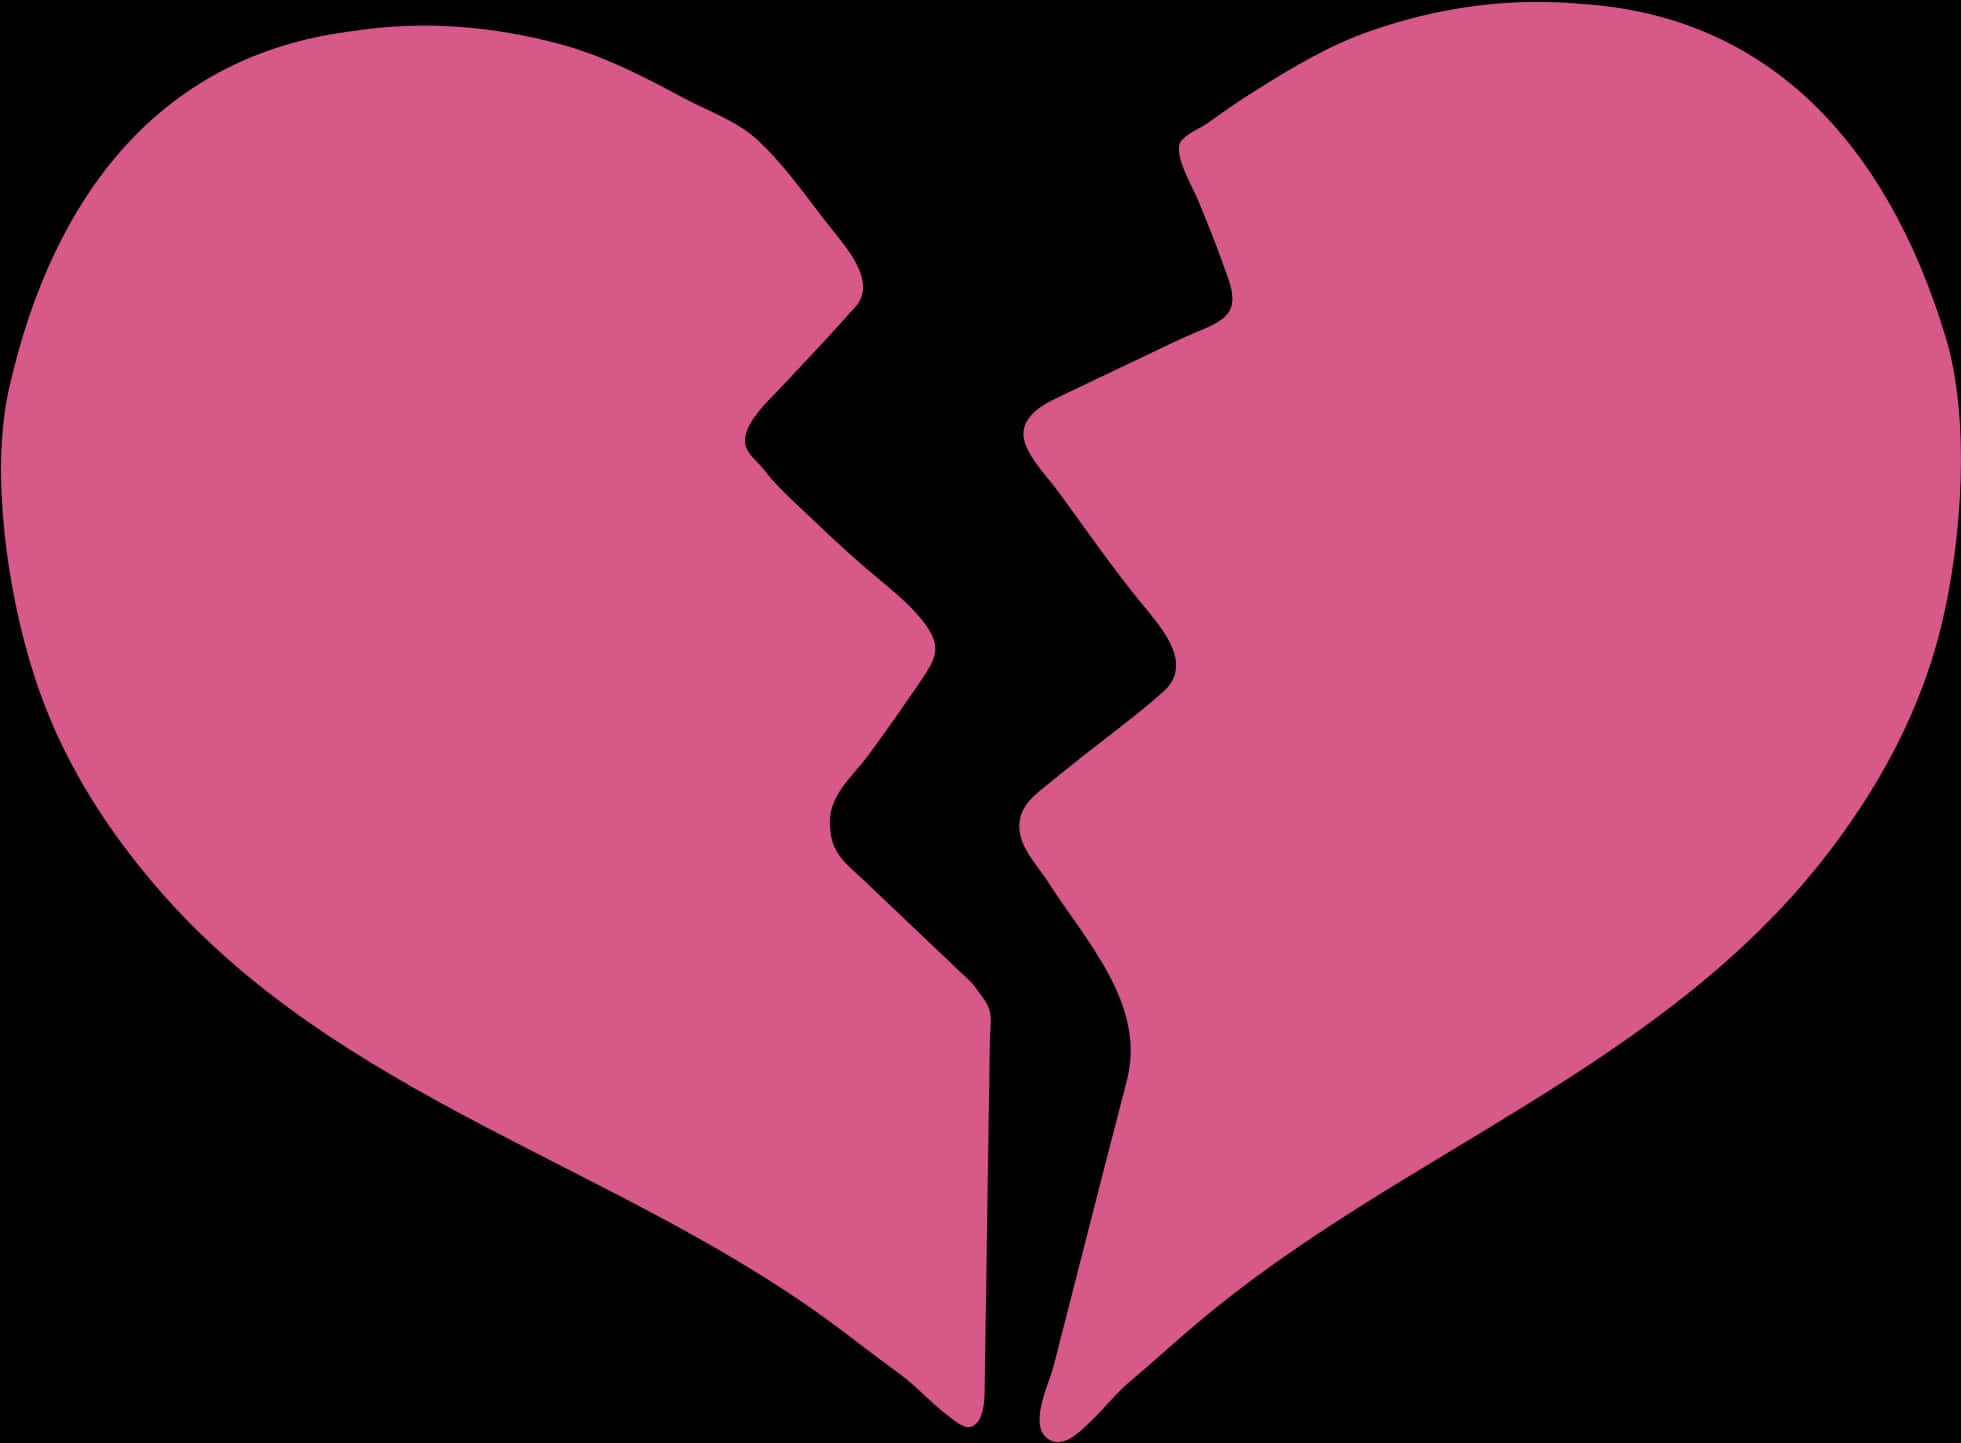 A Pink Broken Heart On A Black Background PNG